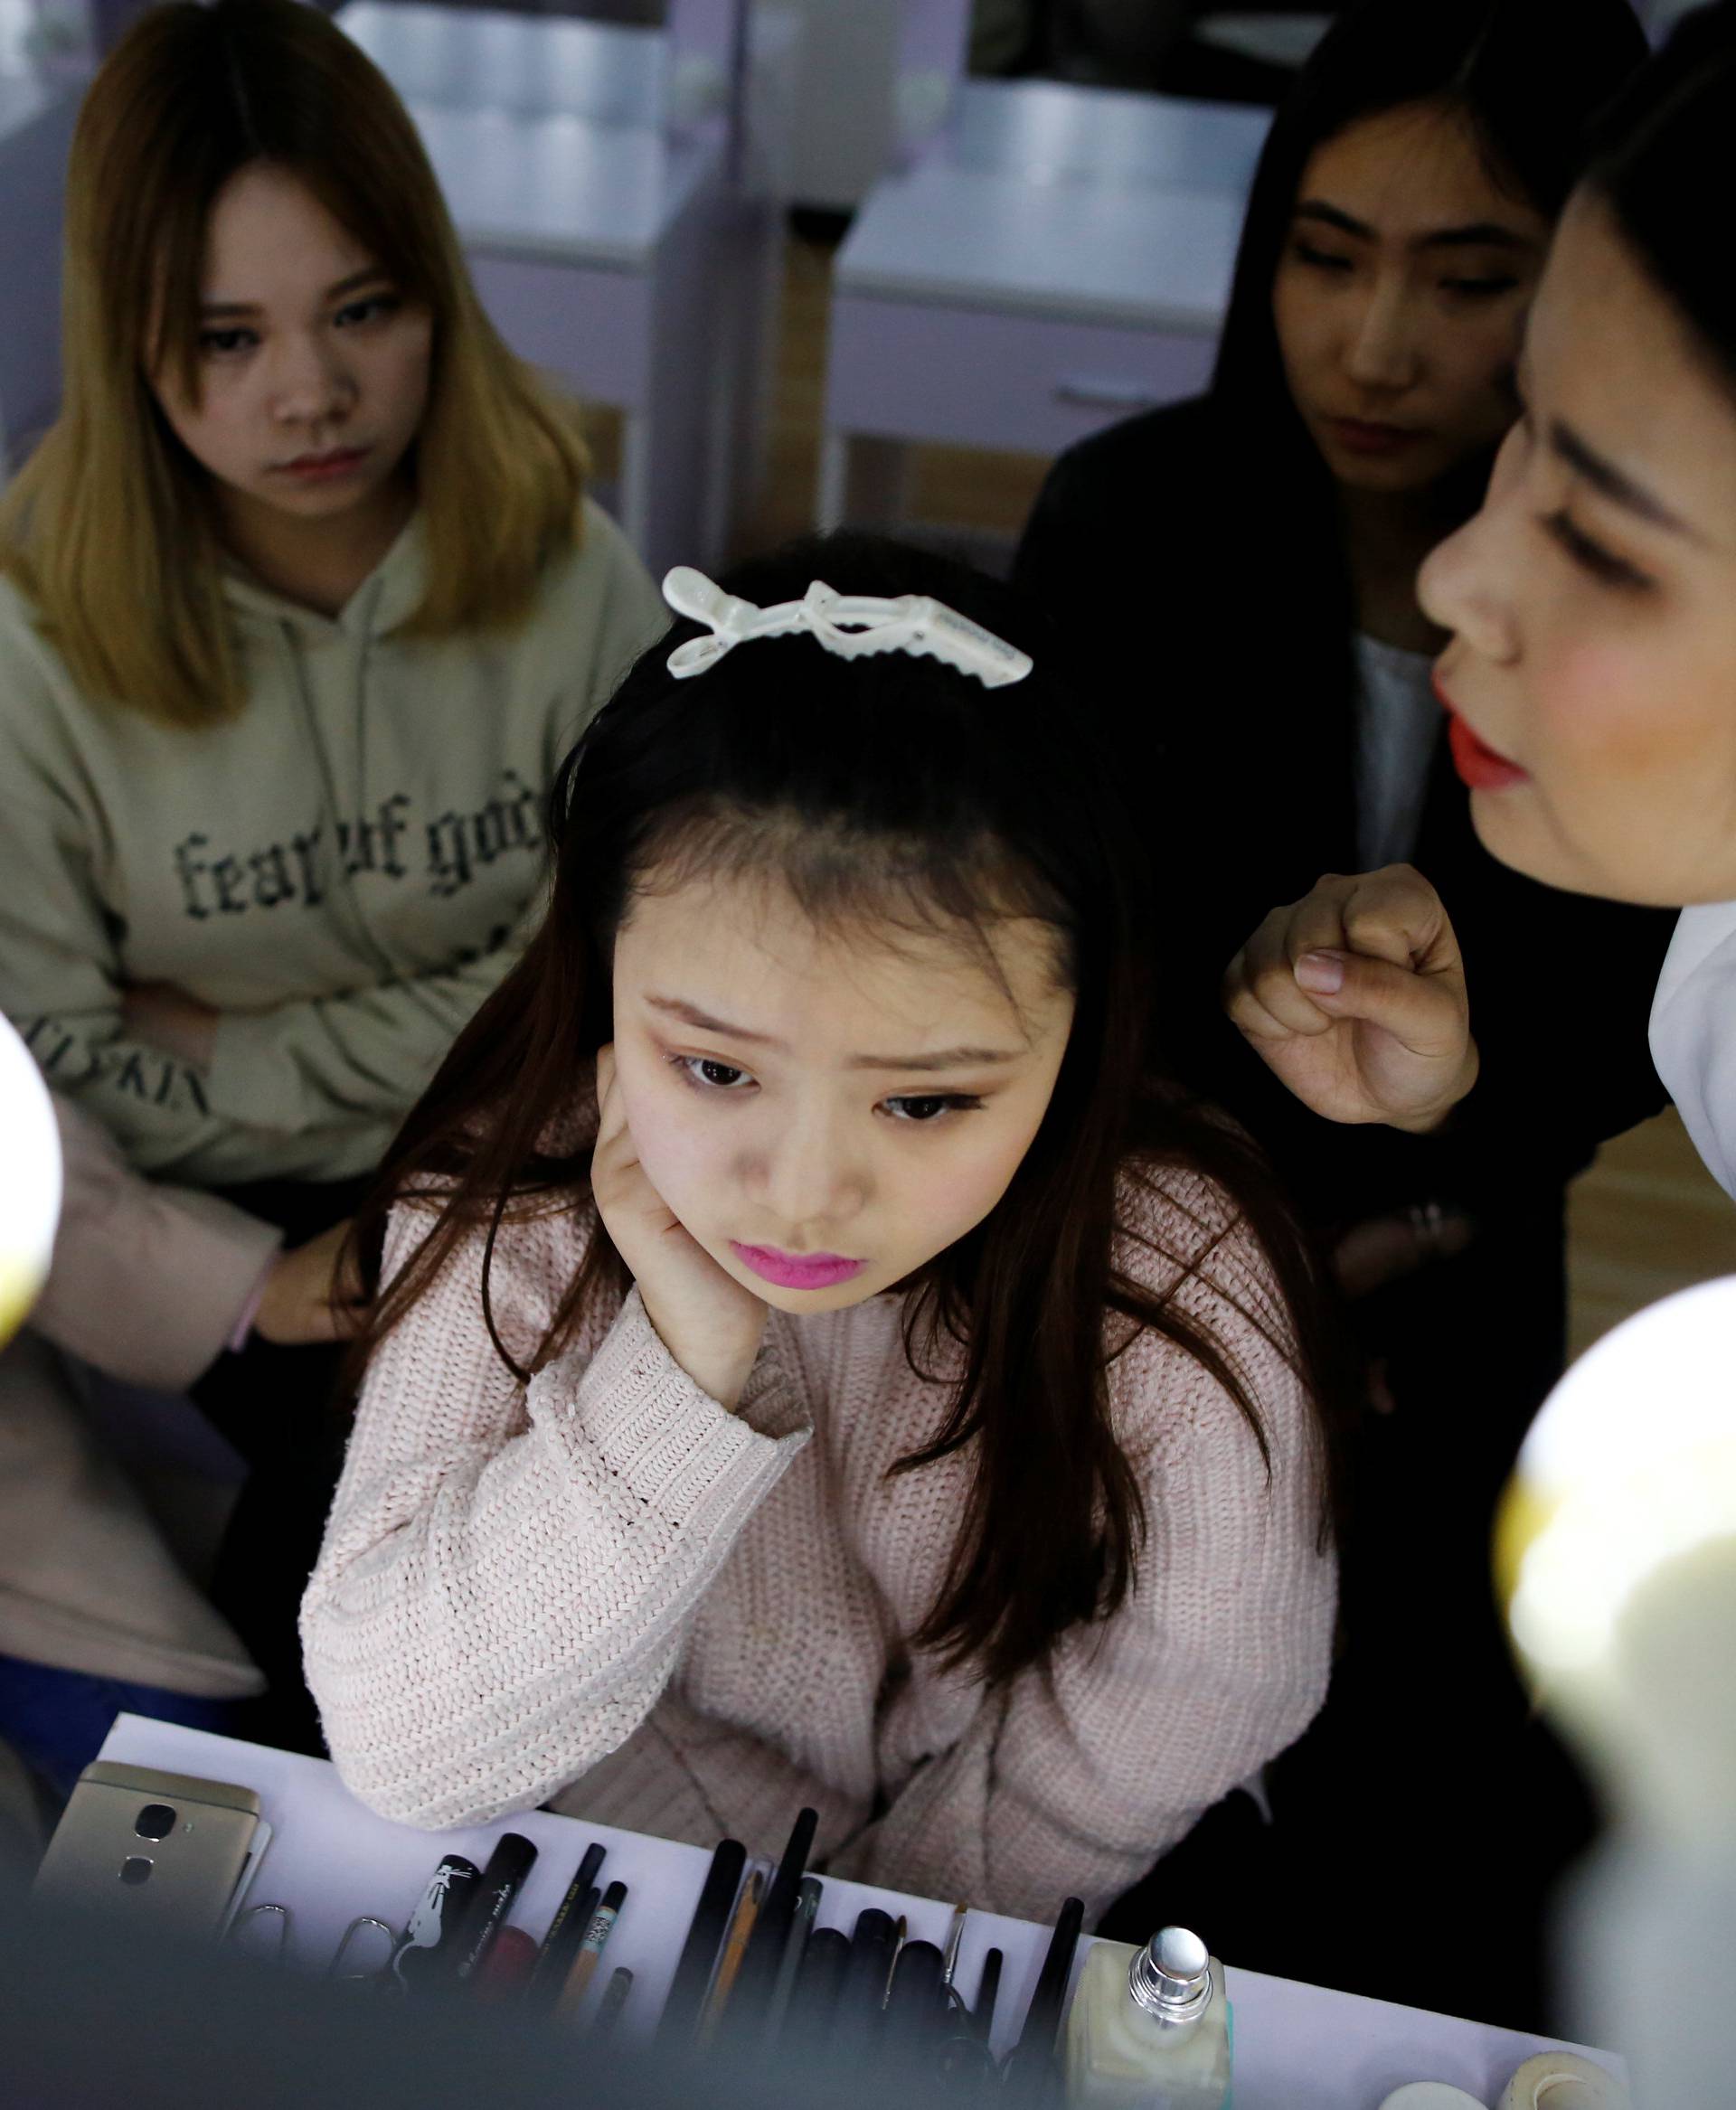 Girls attend make-up training session at live streaming talent agency Three Minute TV, in Beijing